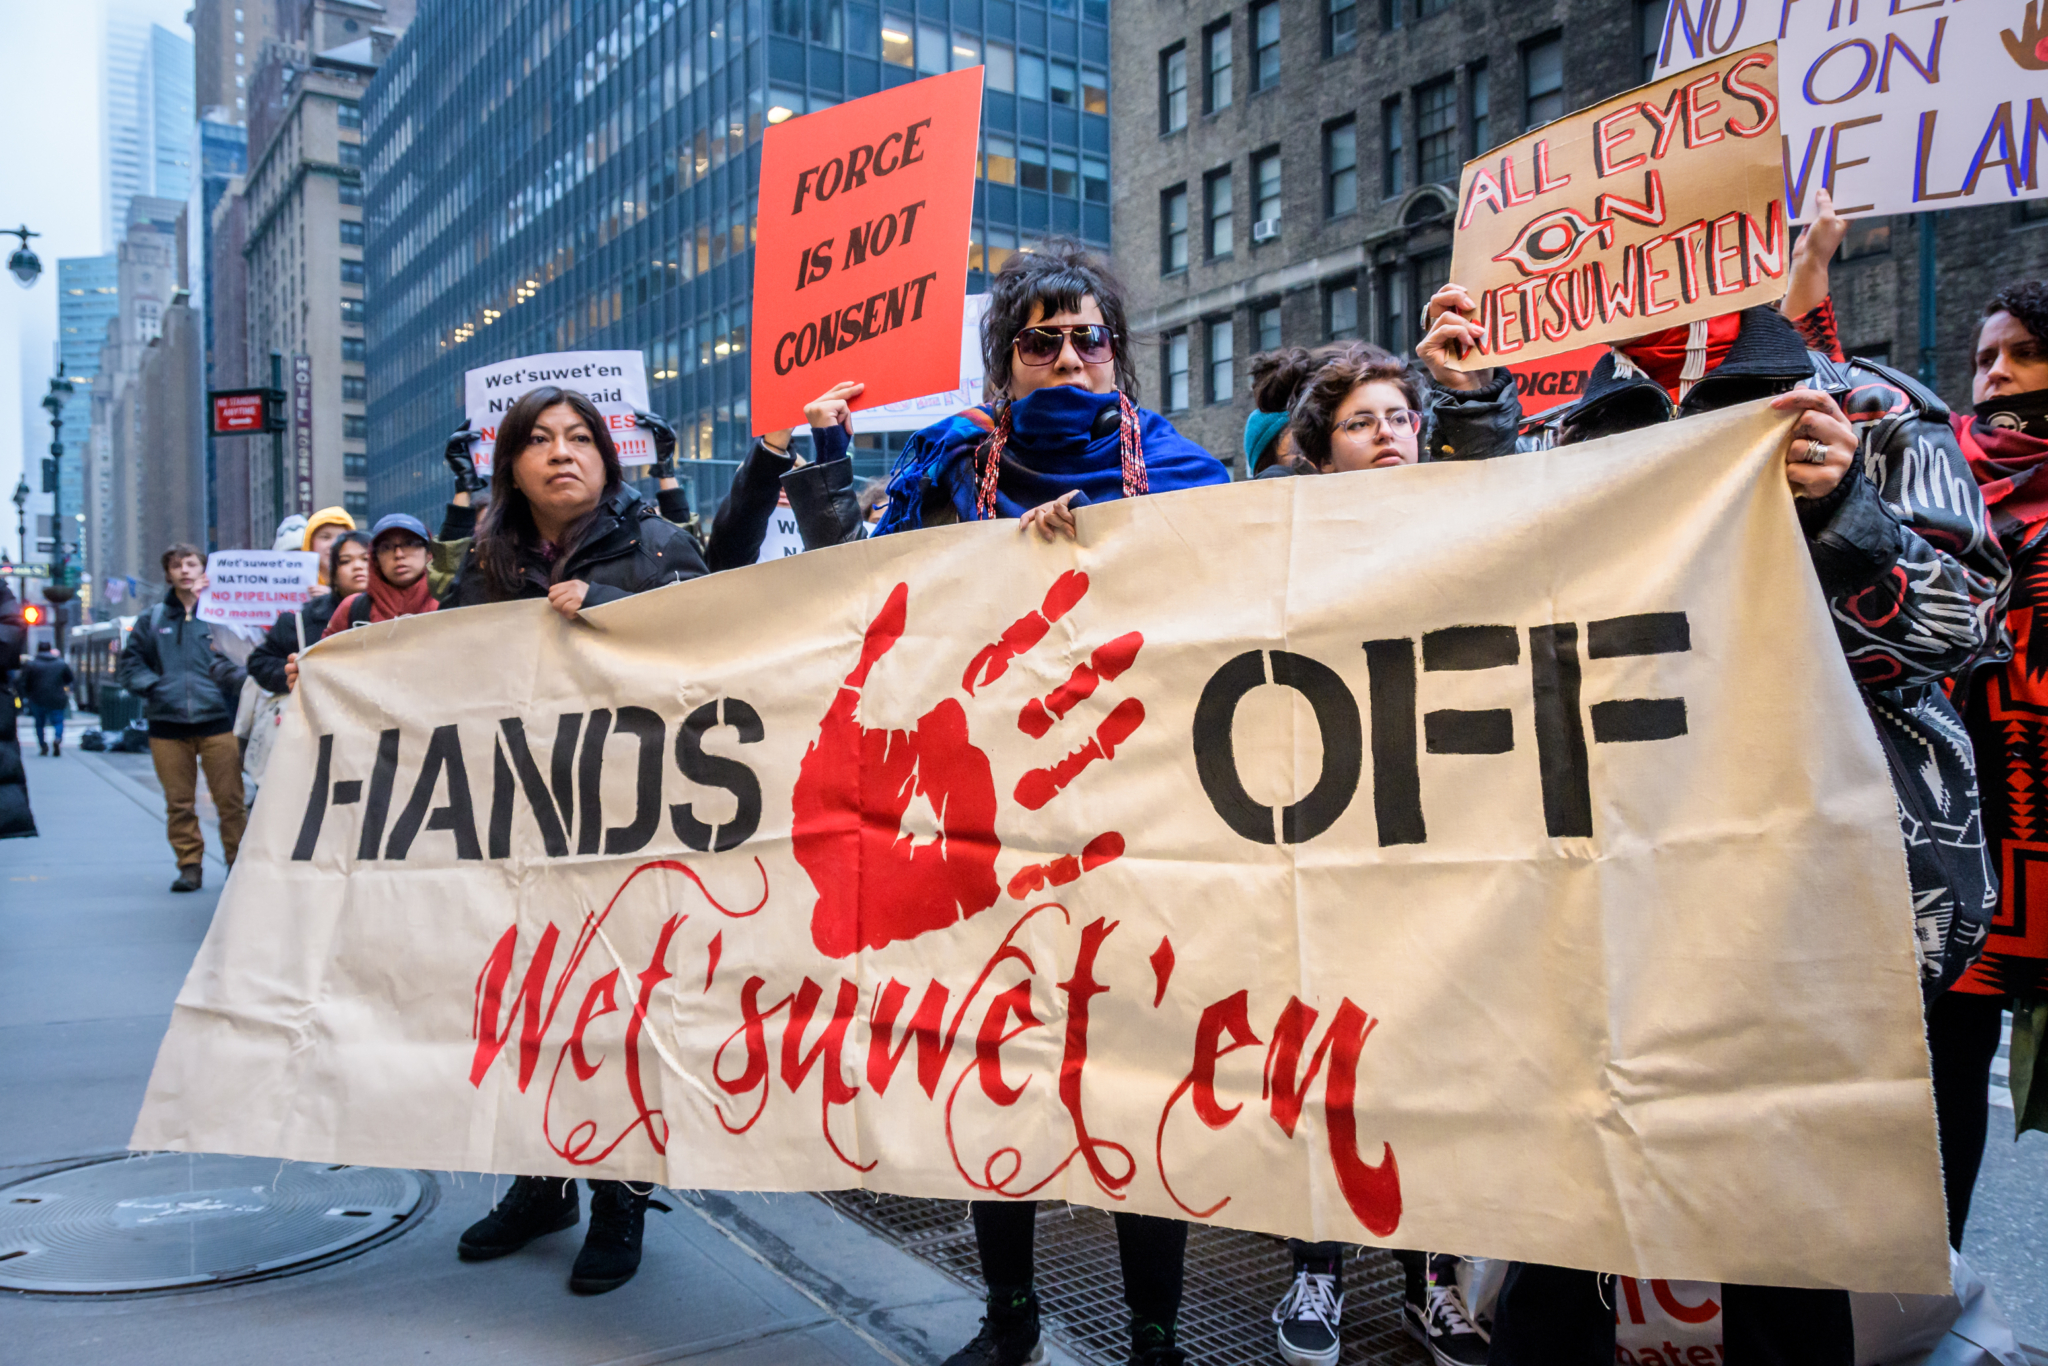 A group of protesters on the sidewalk hold up a banner stating "Hands Of Wet'suwet'en" and featuring a red hand print in the middle of the text.